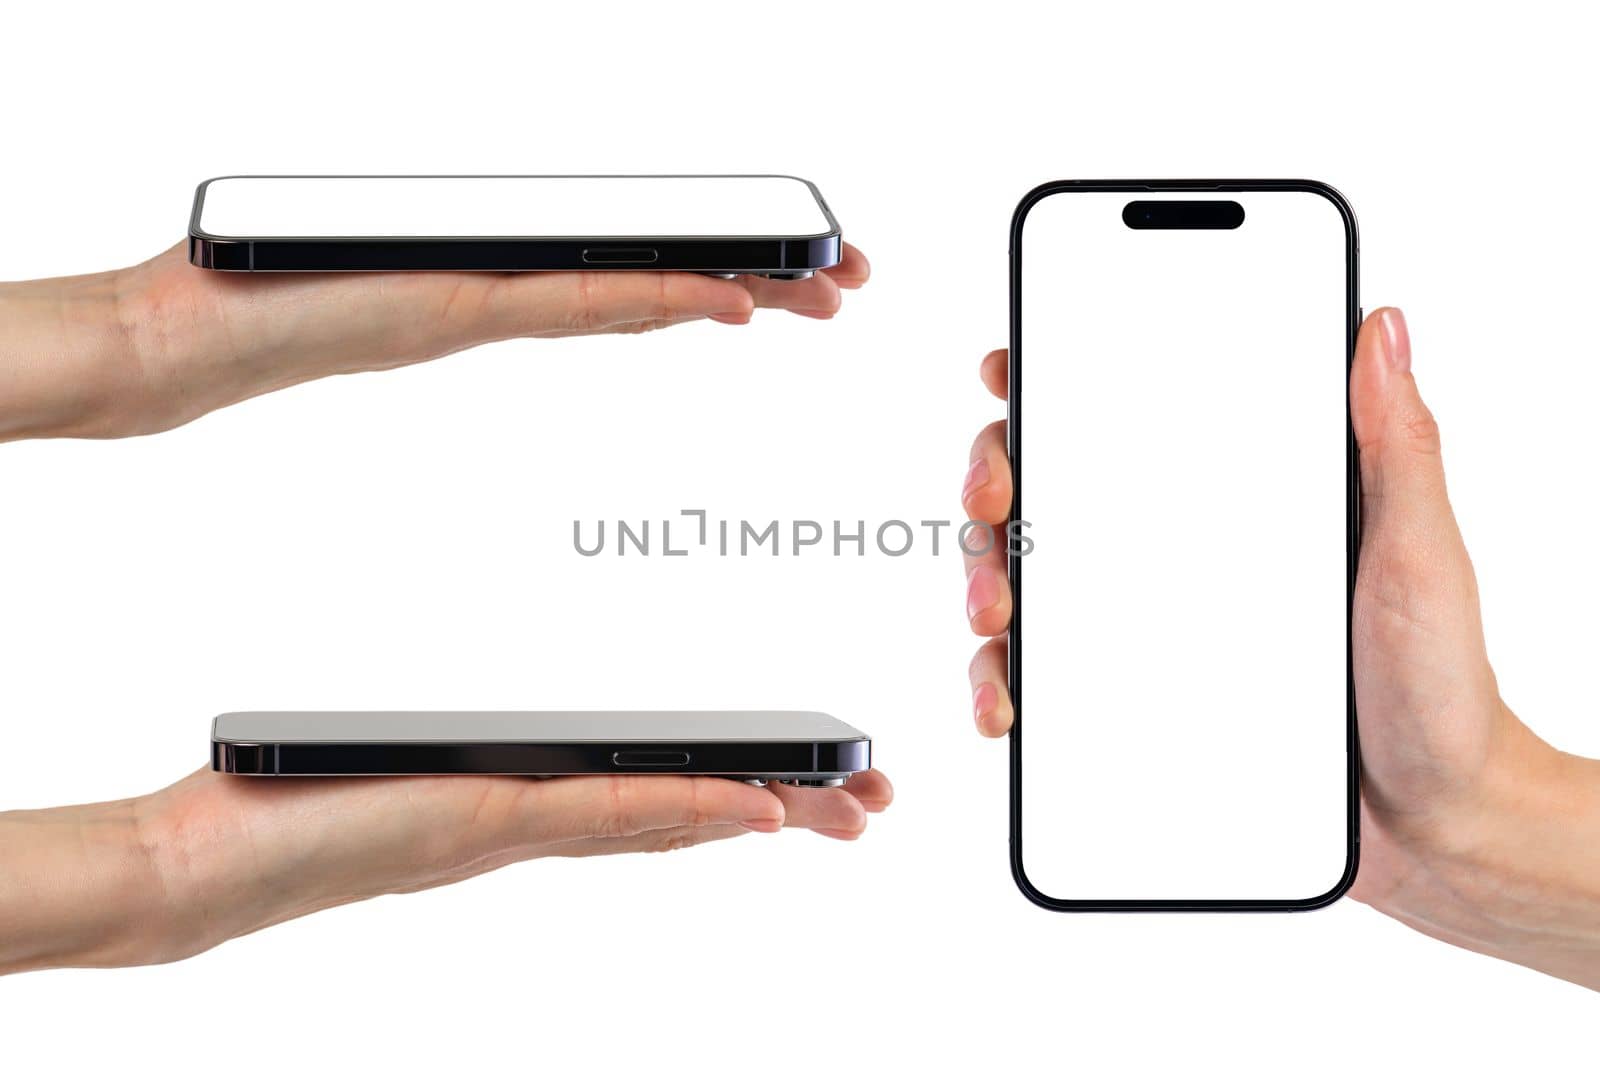 Phone in hand, set. Modern, new phone in hand isolated on white background from different angles. Mockup set, smartphones in hands from different sides to be inserted into the project.